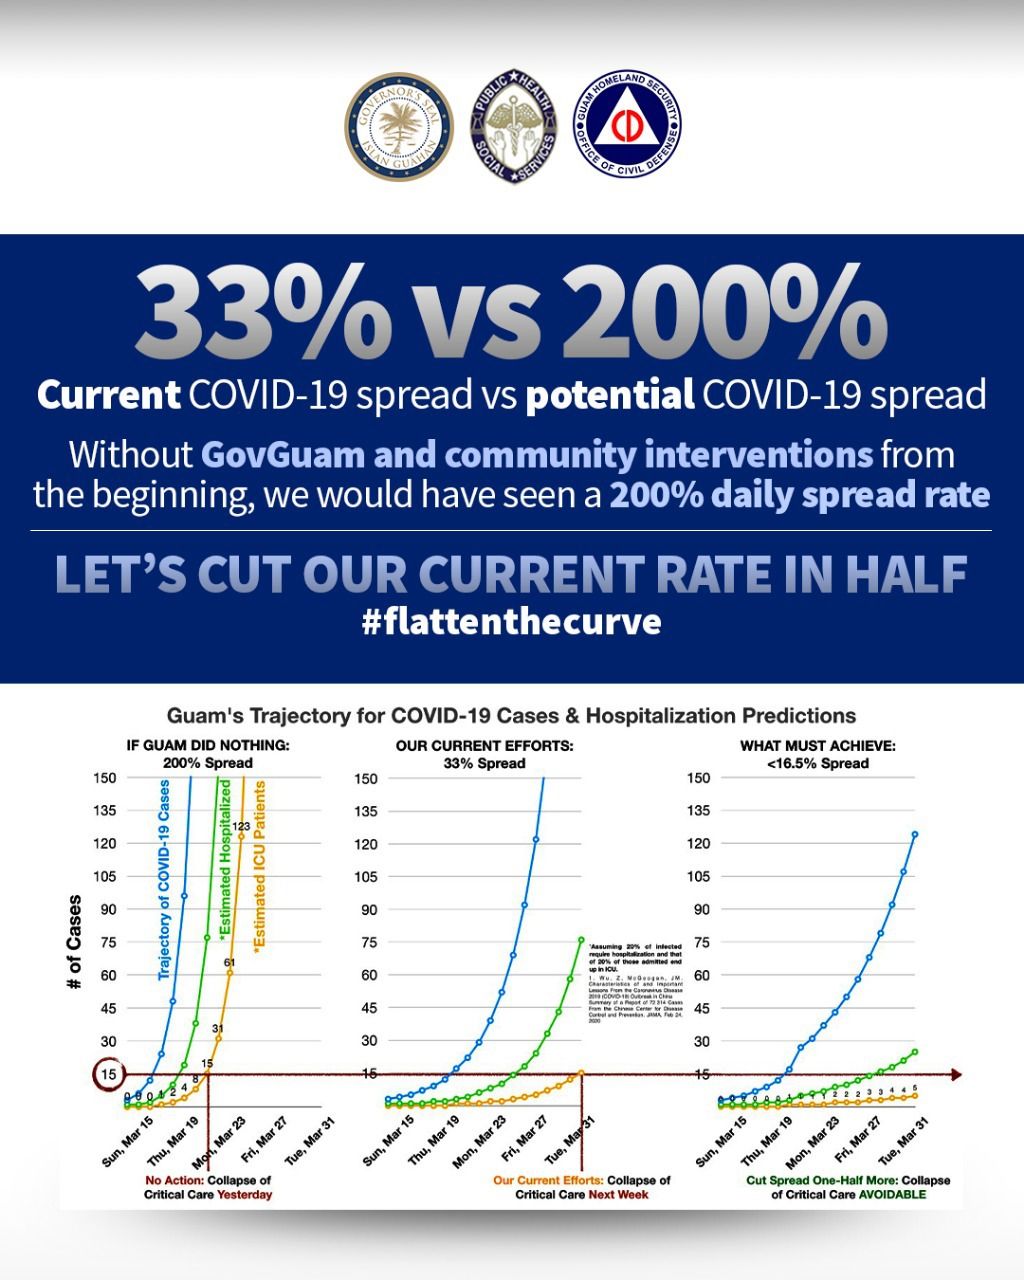 Current COVID-19 spread of 33% vs potential COVID-19 spread of 200%. Without GovGuam and community interventions, we would have seen a 200% daily spread rate. Let's cut our current rate in half.